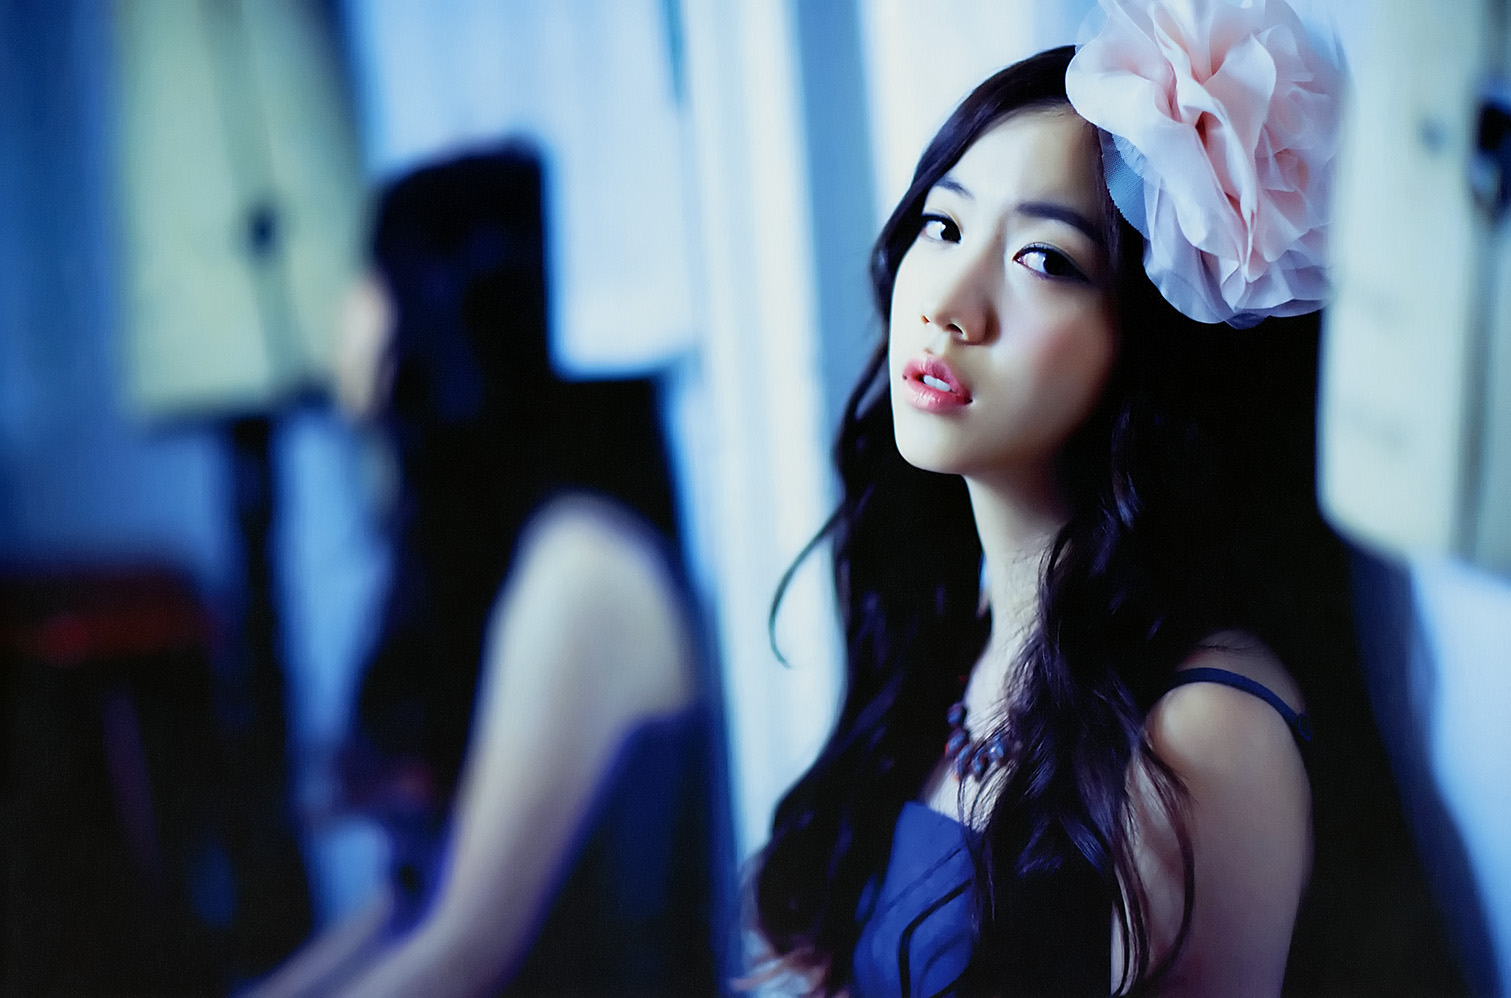 hwayoung